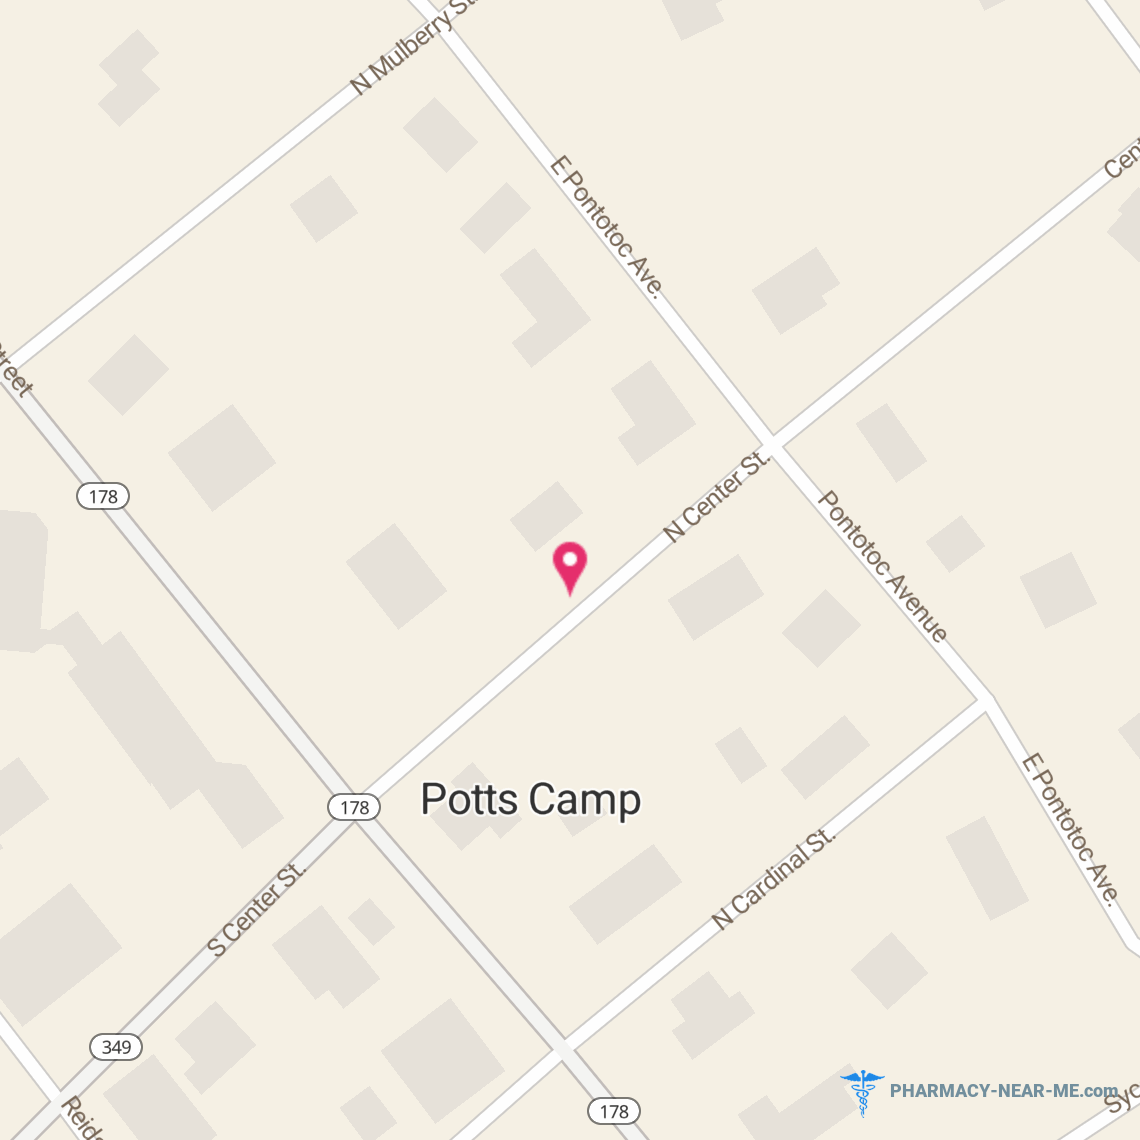 POTTS CAMP PHARMACY - Pharmacy Hours, Phone, Reviews & Information: 41 South Center Street, Potts Camp, Mississippi 38659, United States